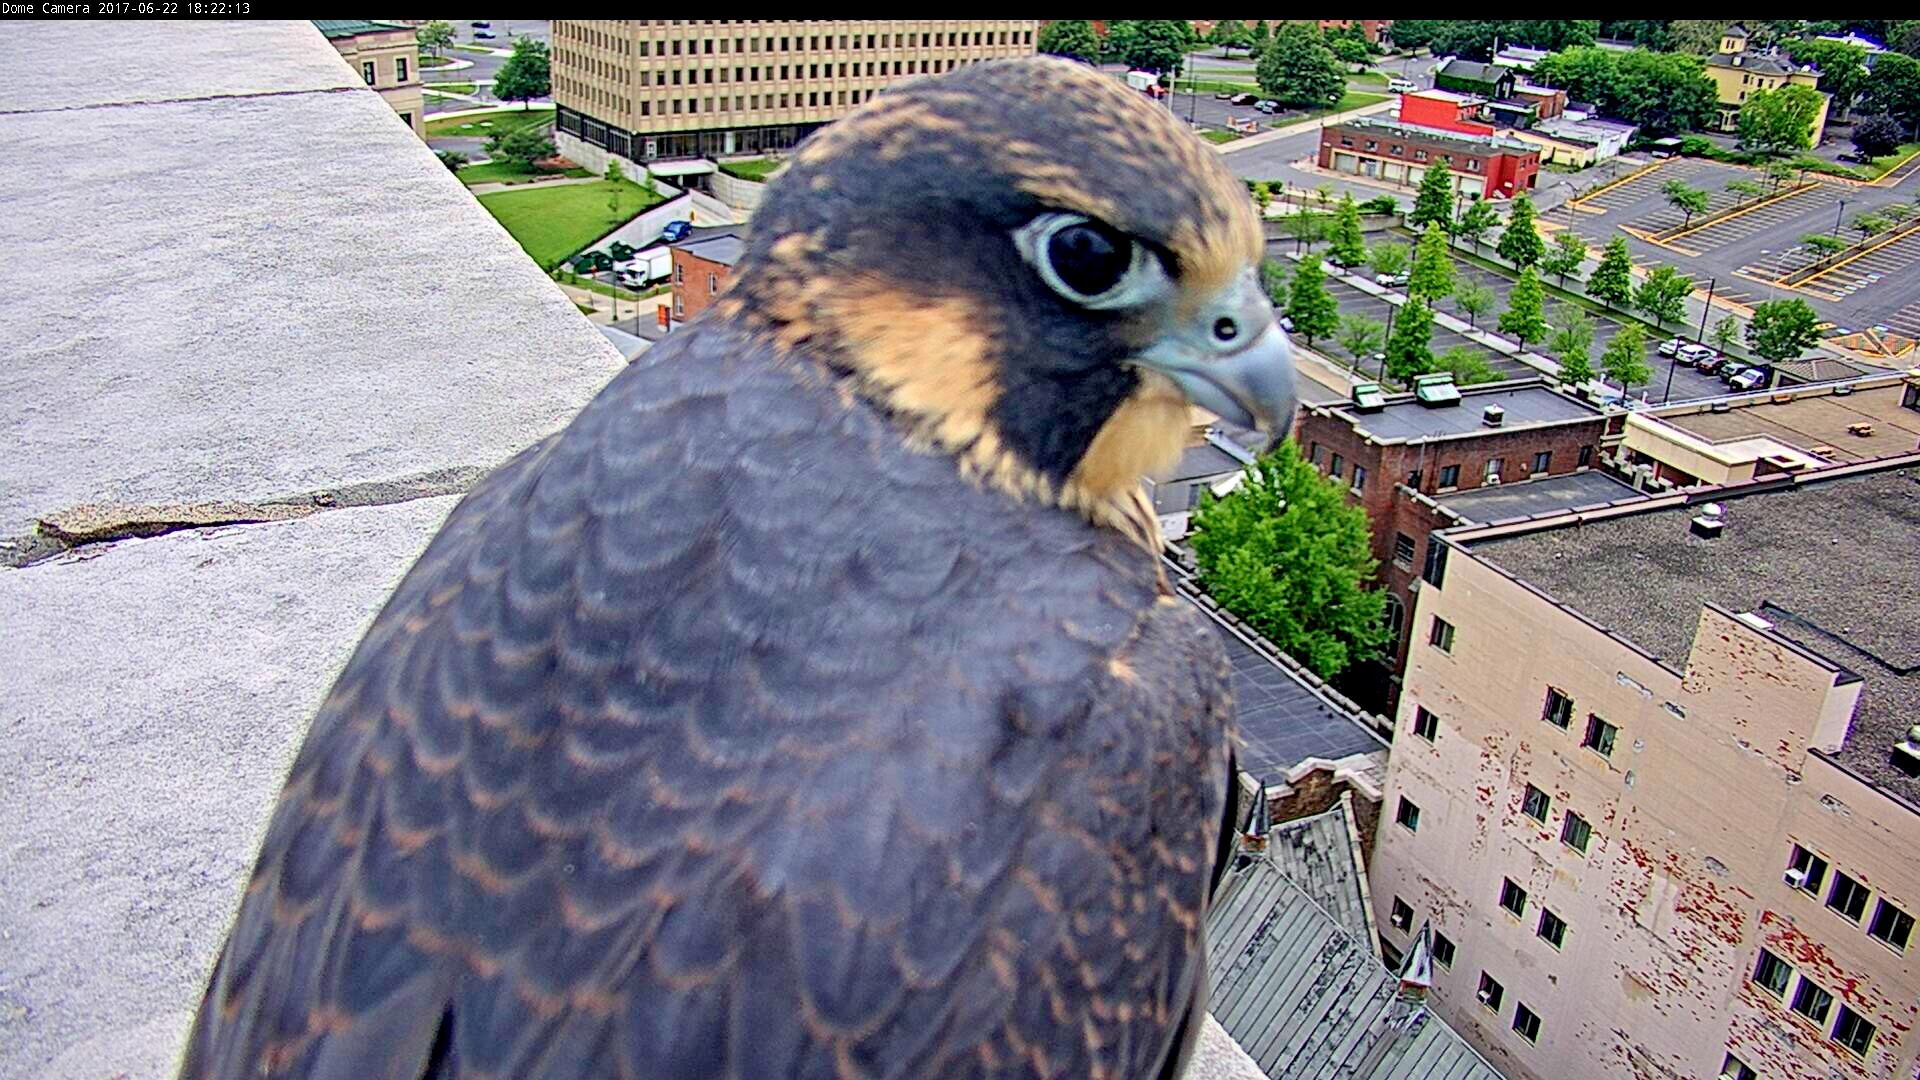 Spirit's first flight is to the roof of the ADK Bank and she perches right next to our PTZ cam